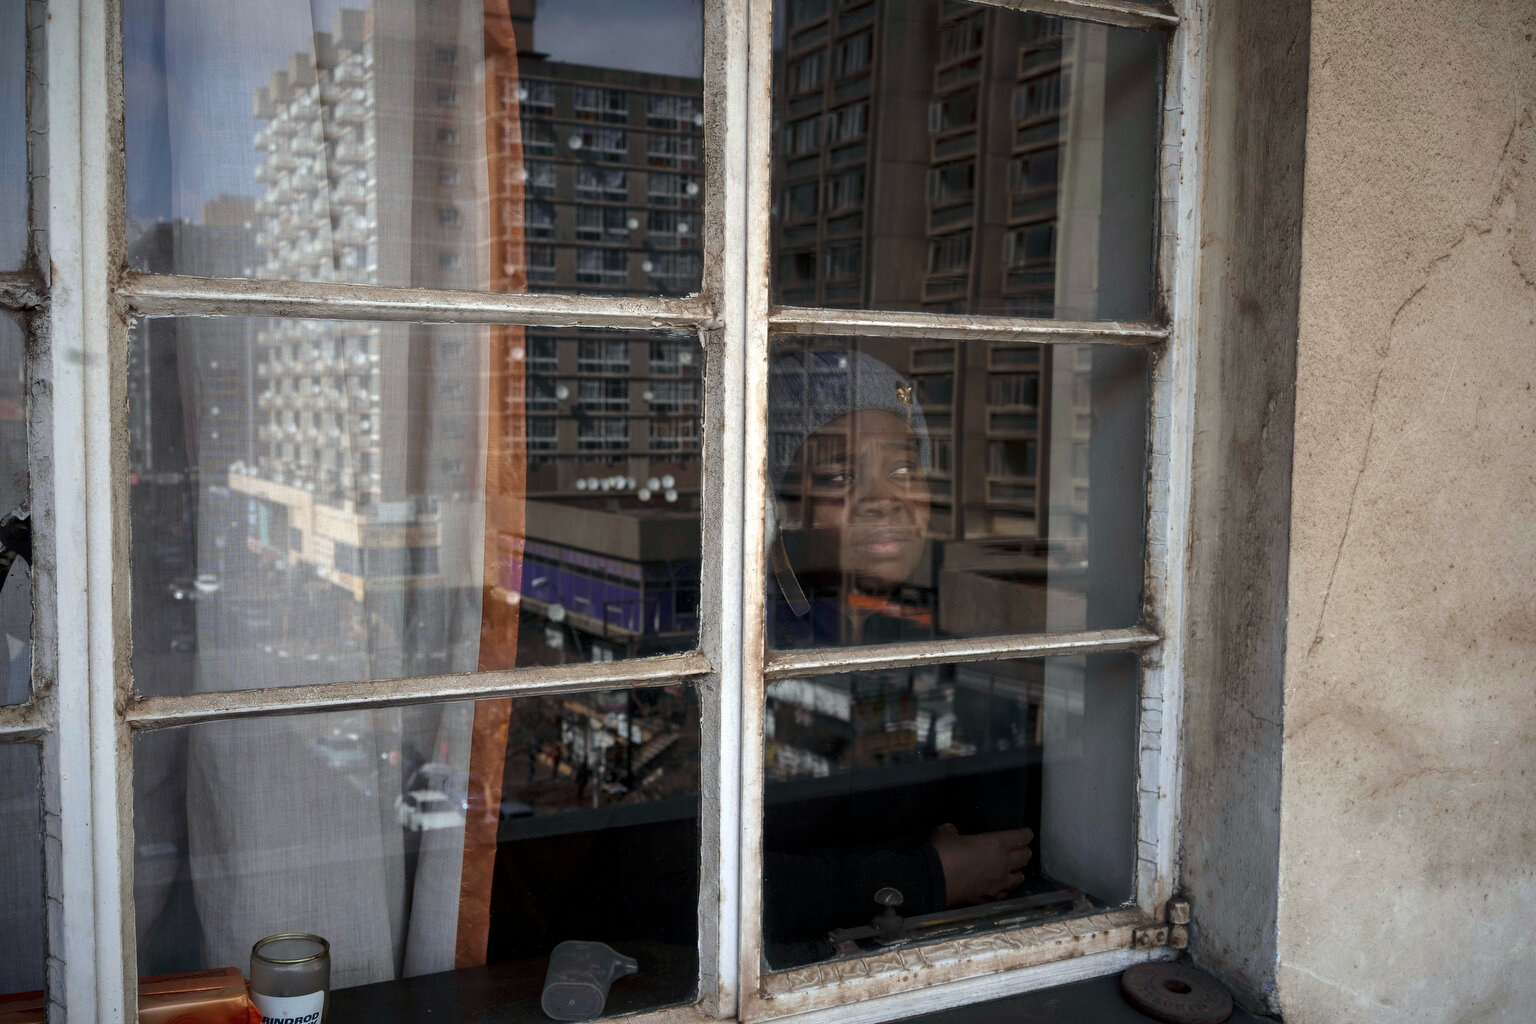  Sibongile Zulu poses for a portrait inside her home in Johannesburg, South Africa, Tuesday, July 28, 2020. Zulu is HIV positive and couldn't get her full medication for two months due to a lack of stock in government pharmacies. (AP Photo/Bram Janss